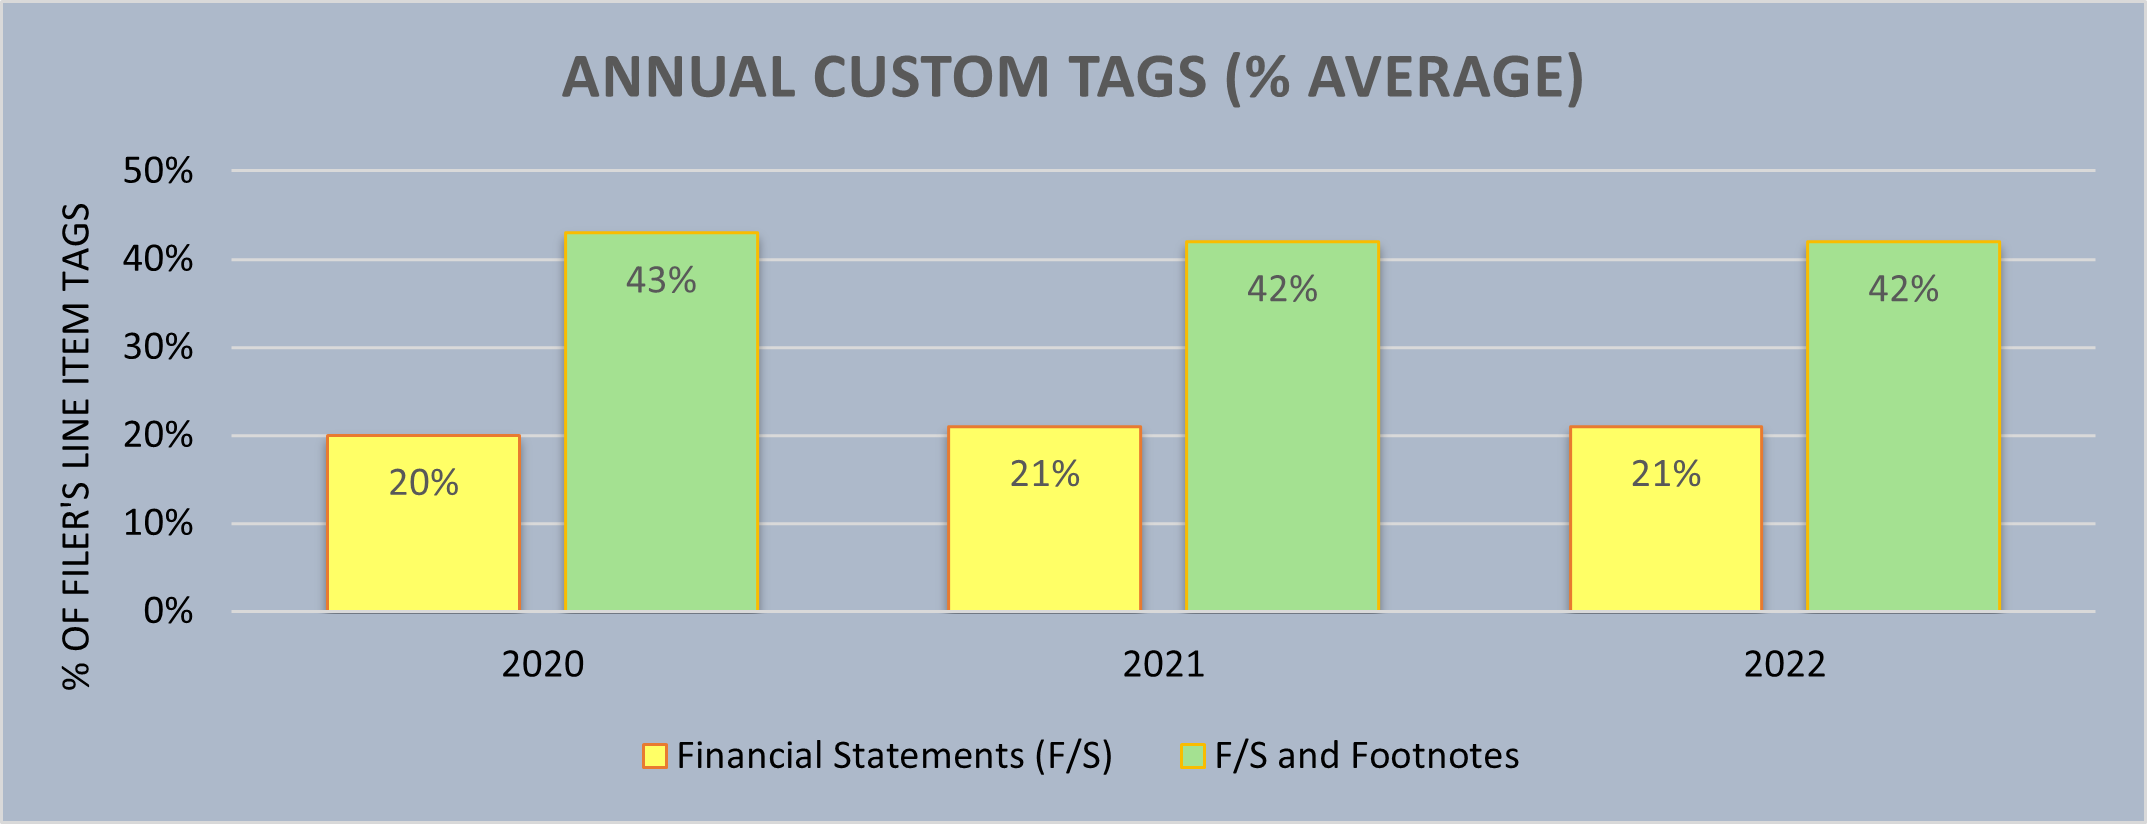 When looking at financial statements and footnote disclosures combined, custom tag rates for foreign private issuers reporting under International Financial Reporting Standards decreased from 43% in 2020 to 42% in 2021, and then remained the same from 2021 to 2022. When looking at financial statements only, the custom tag rates increased from 20% in 2020 to 21% in 2021, and then remained the same from 2021 to 2022.